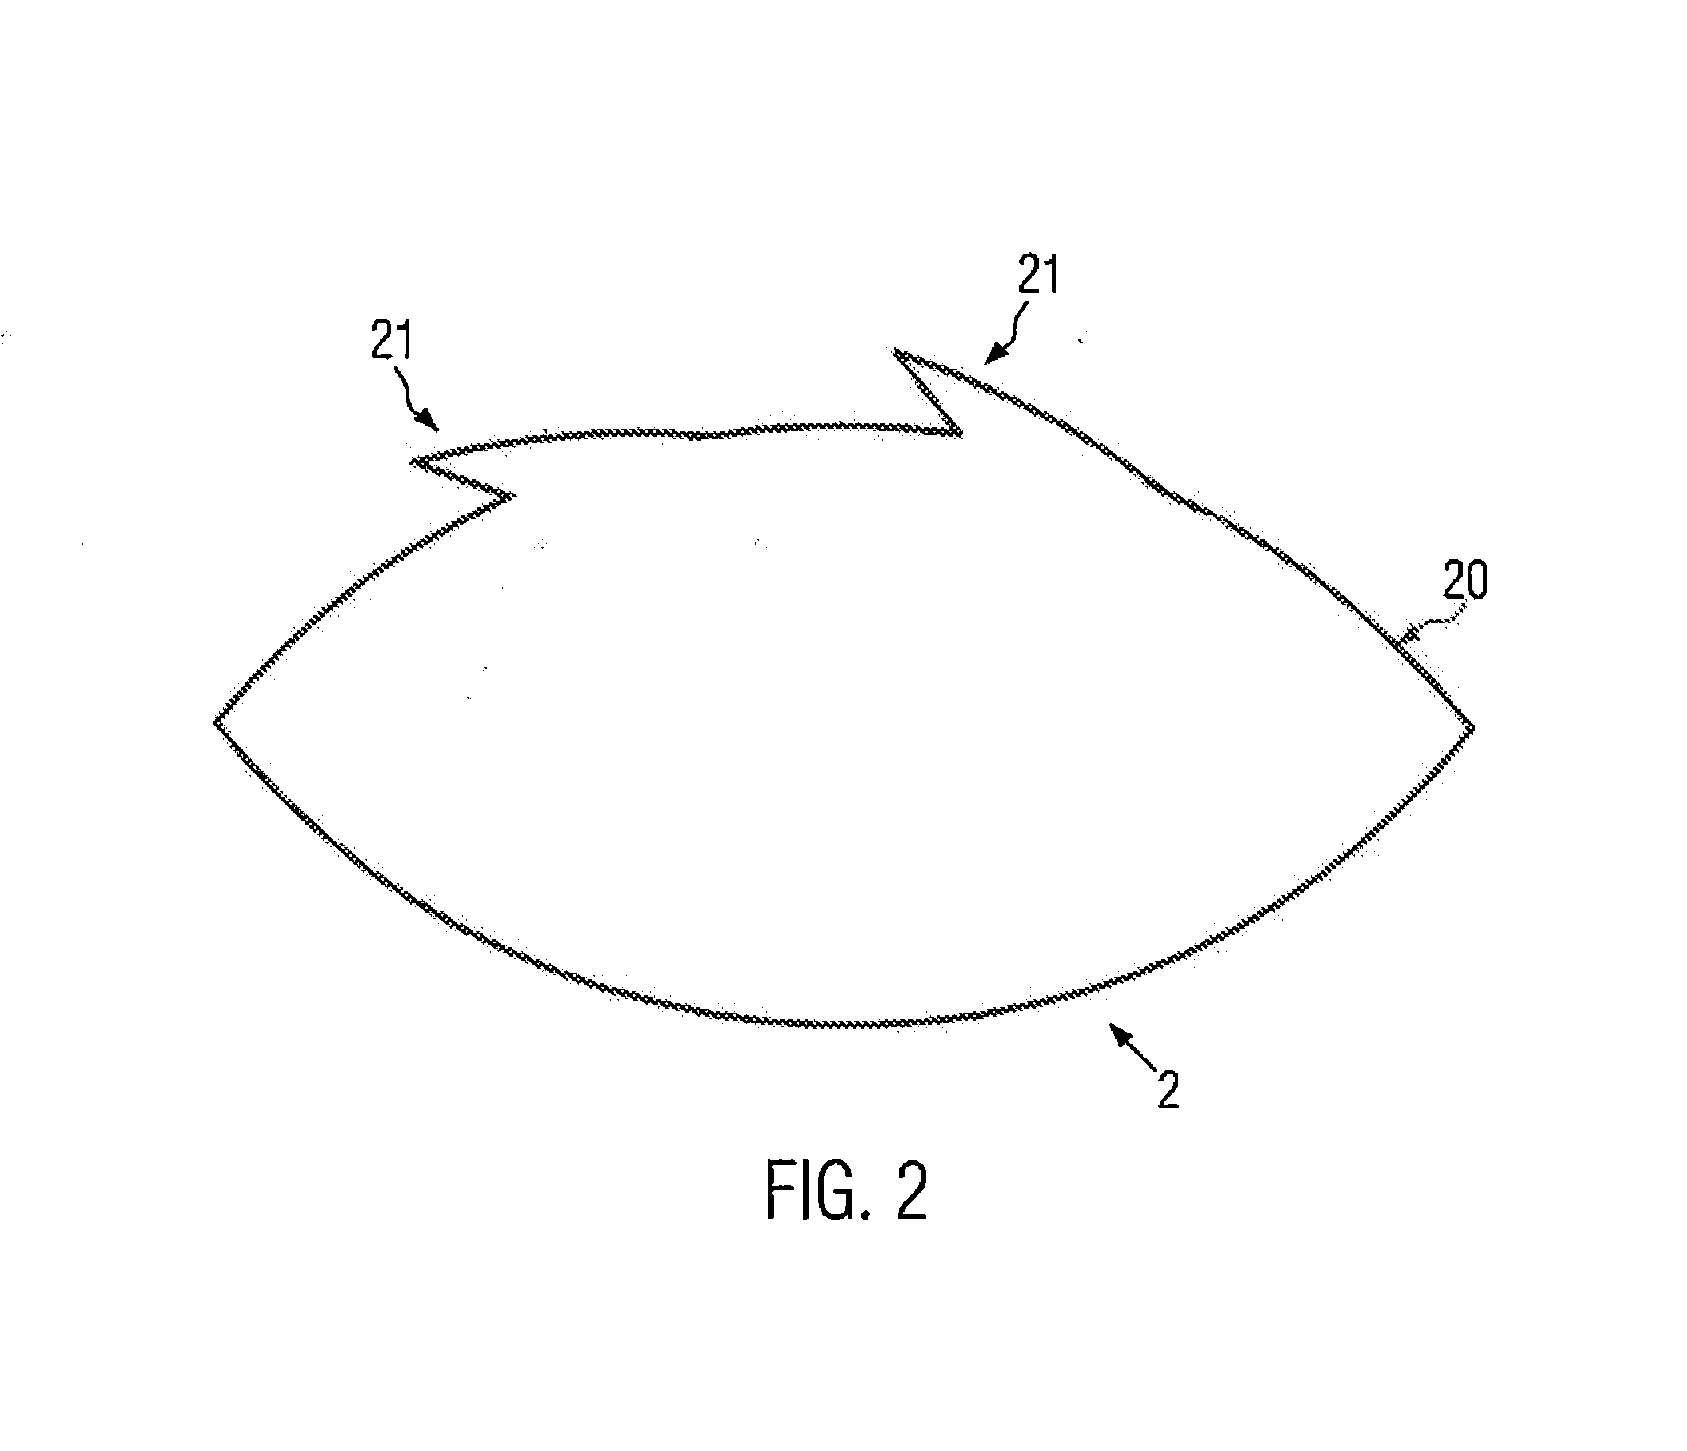 Vacuum Cleaning Apparatus Having a Vacuum Cleaning Unit and a Filter Bag